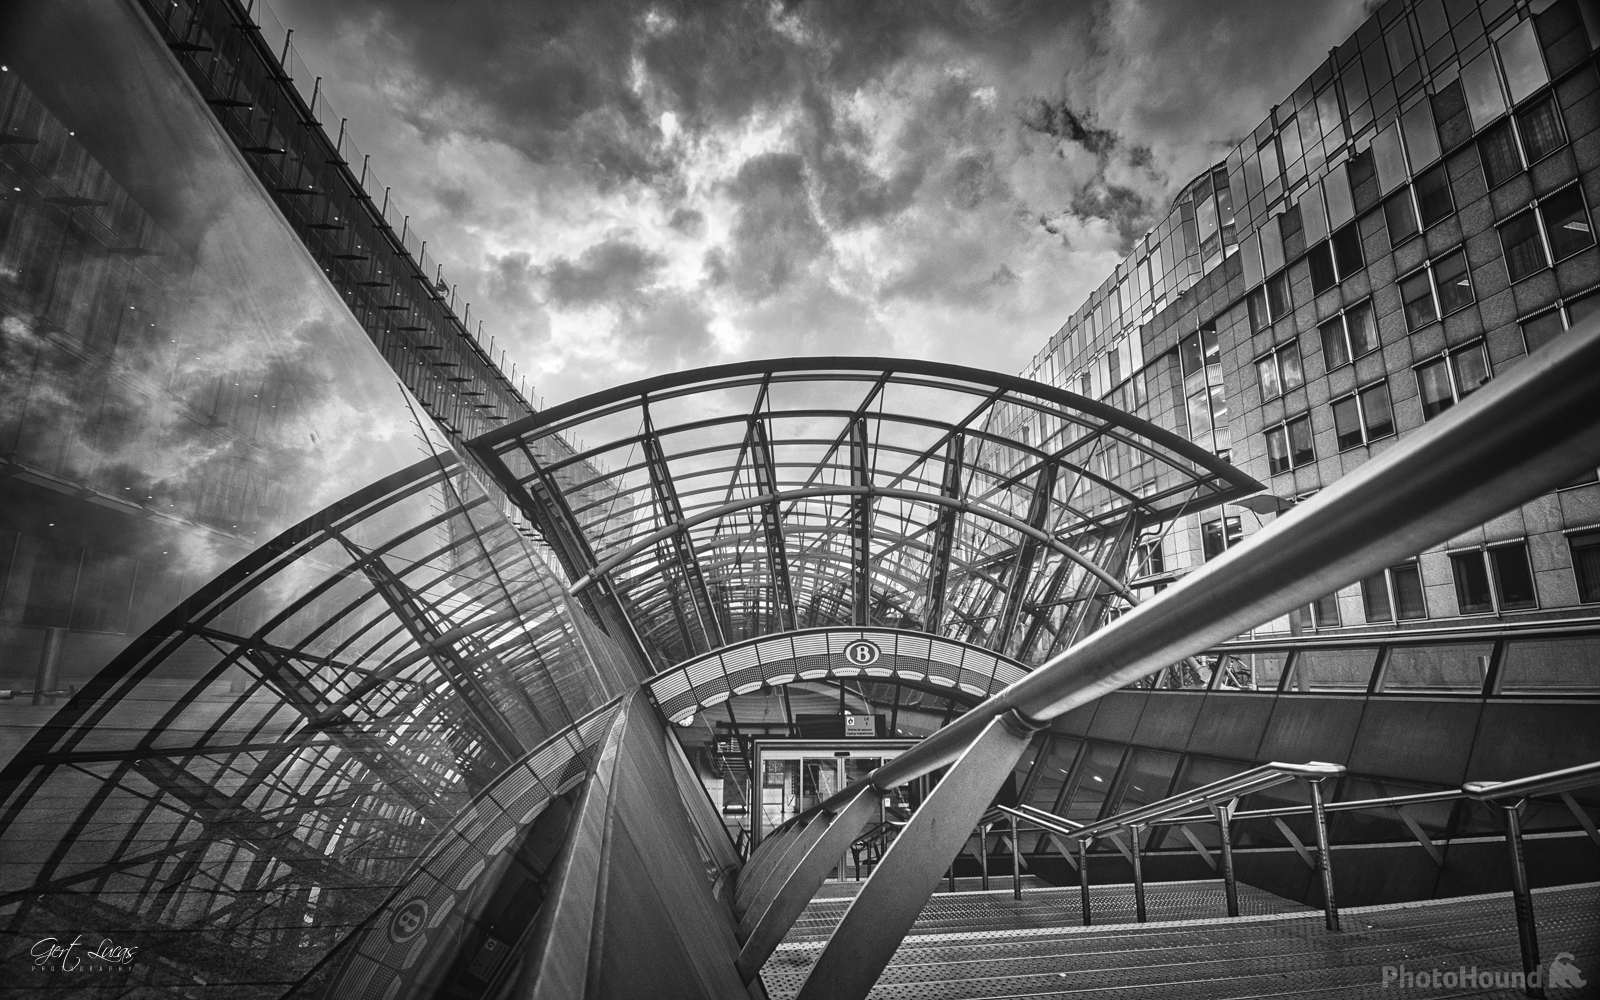 Image of Luxembourg Train Station by Gert Lucas